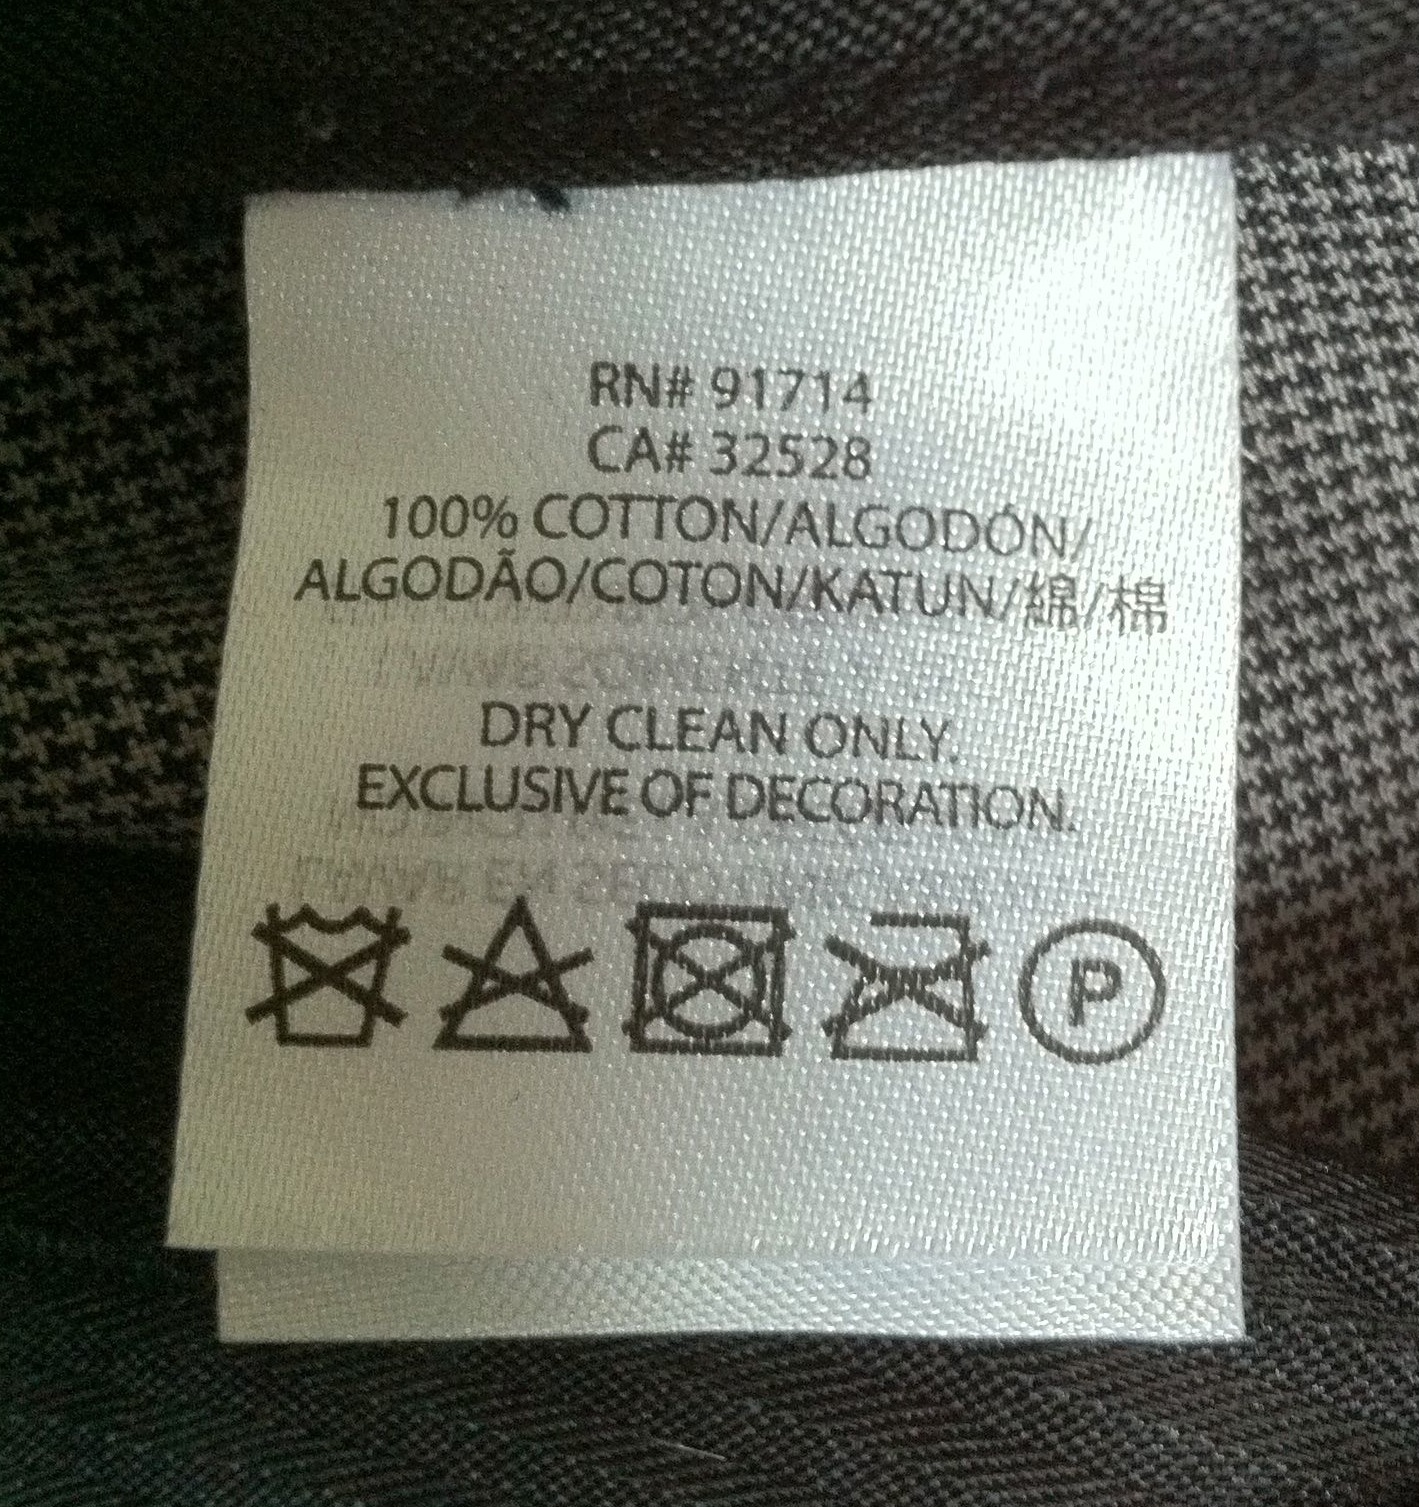 Do I Really Have To Dry Clean Nylon And Rayon Comforter 49